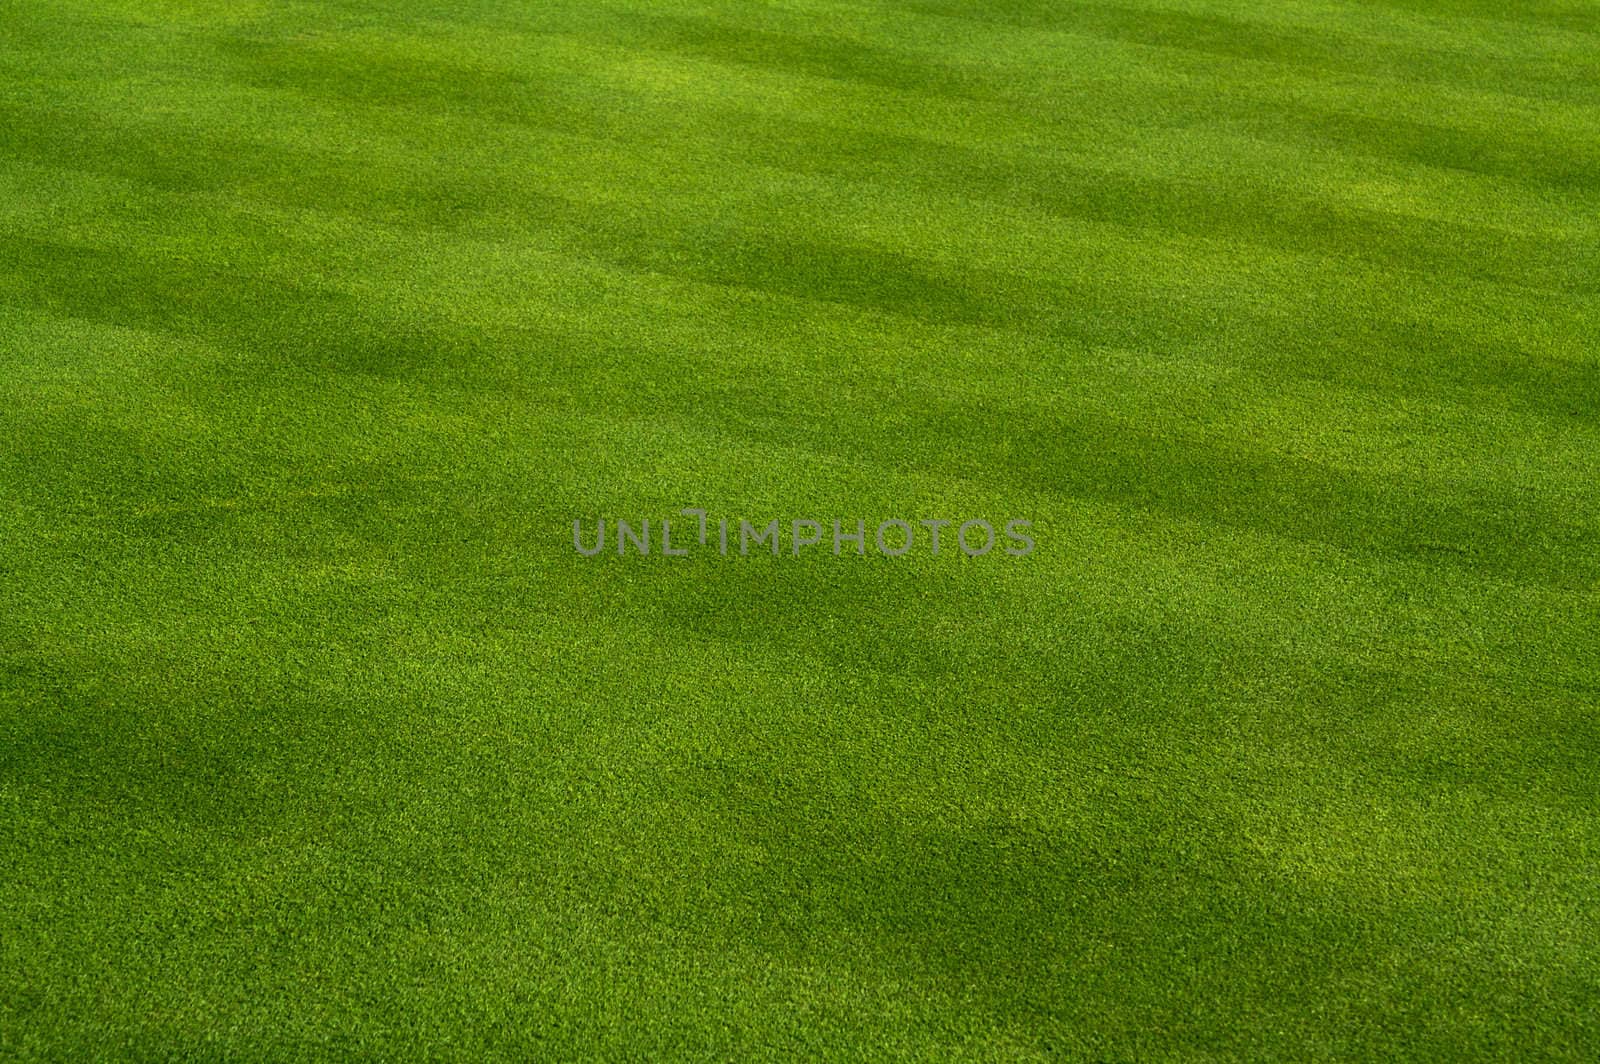 Fresh Cut Grass by Feverpitched